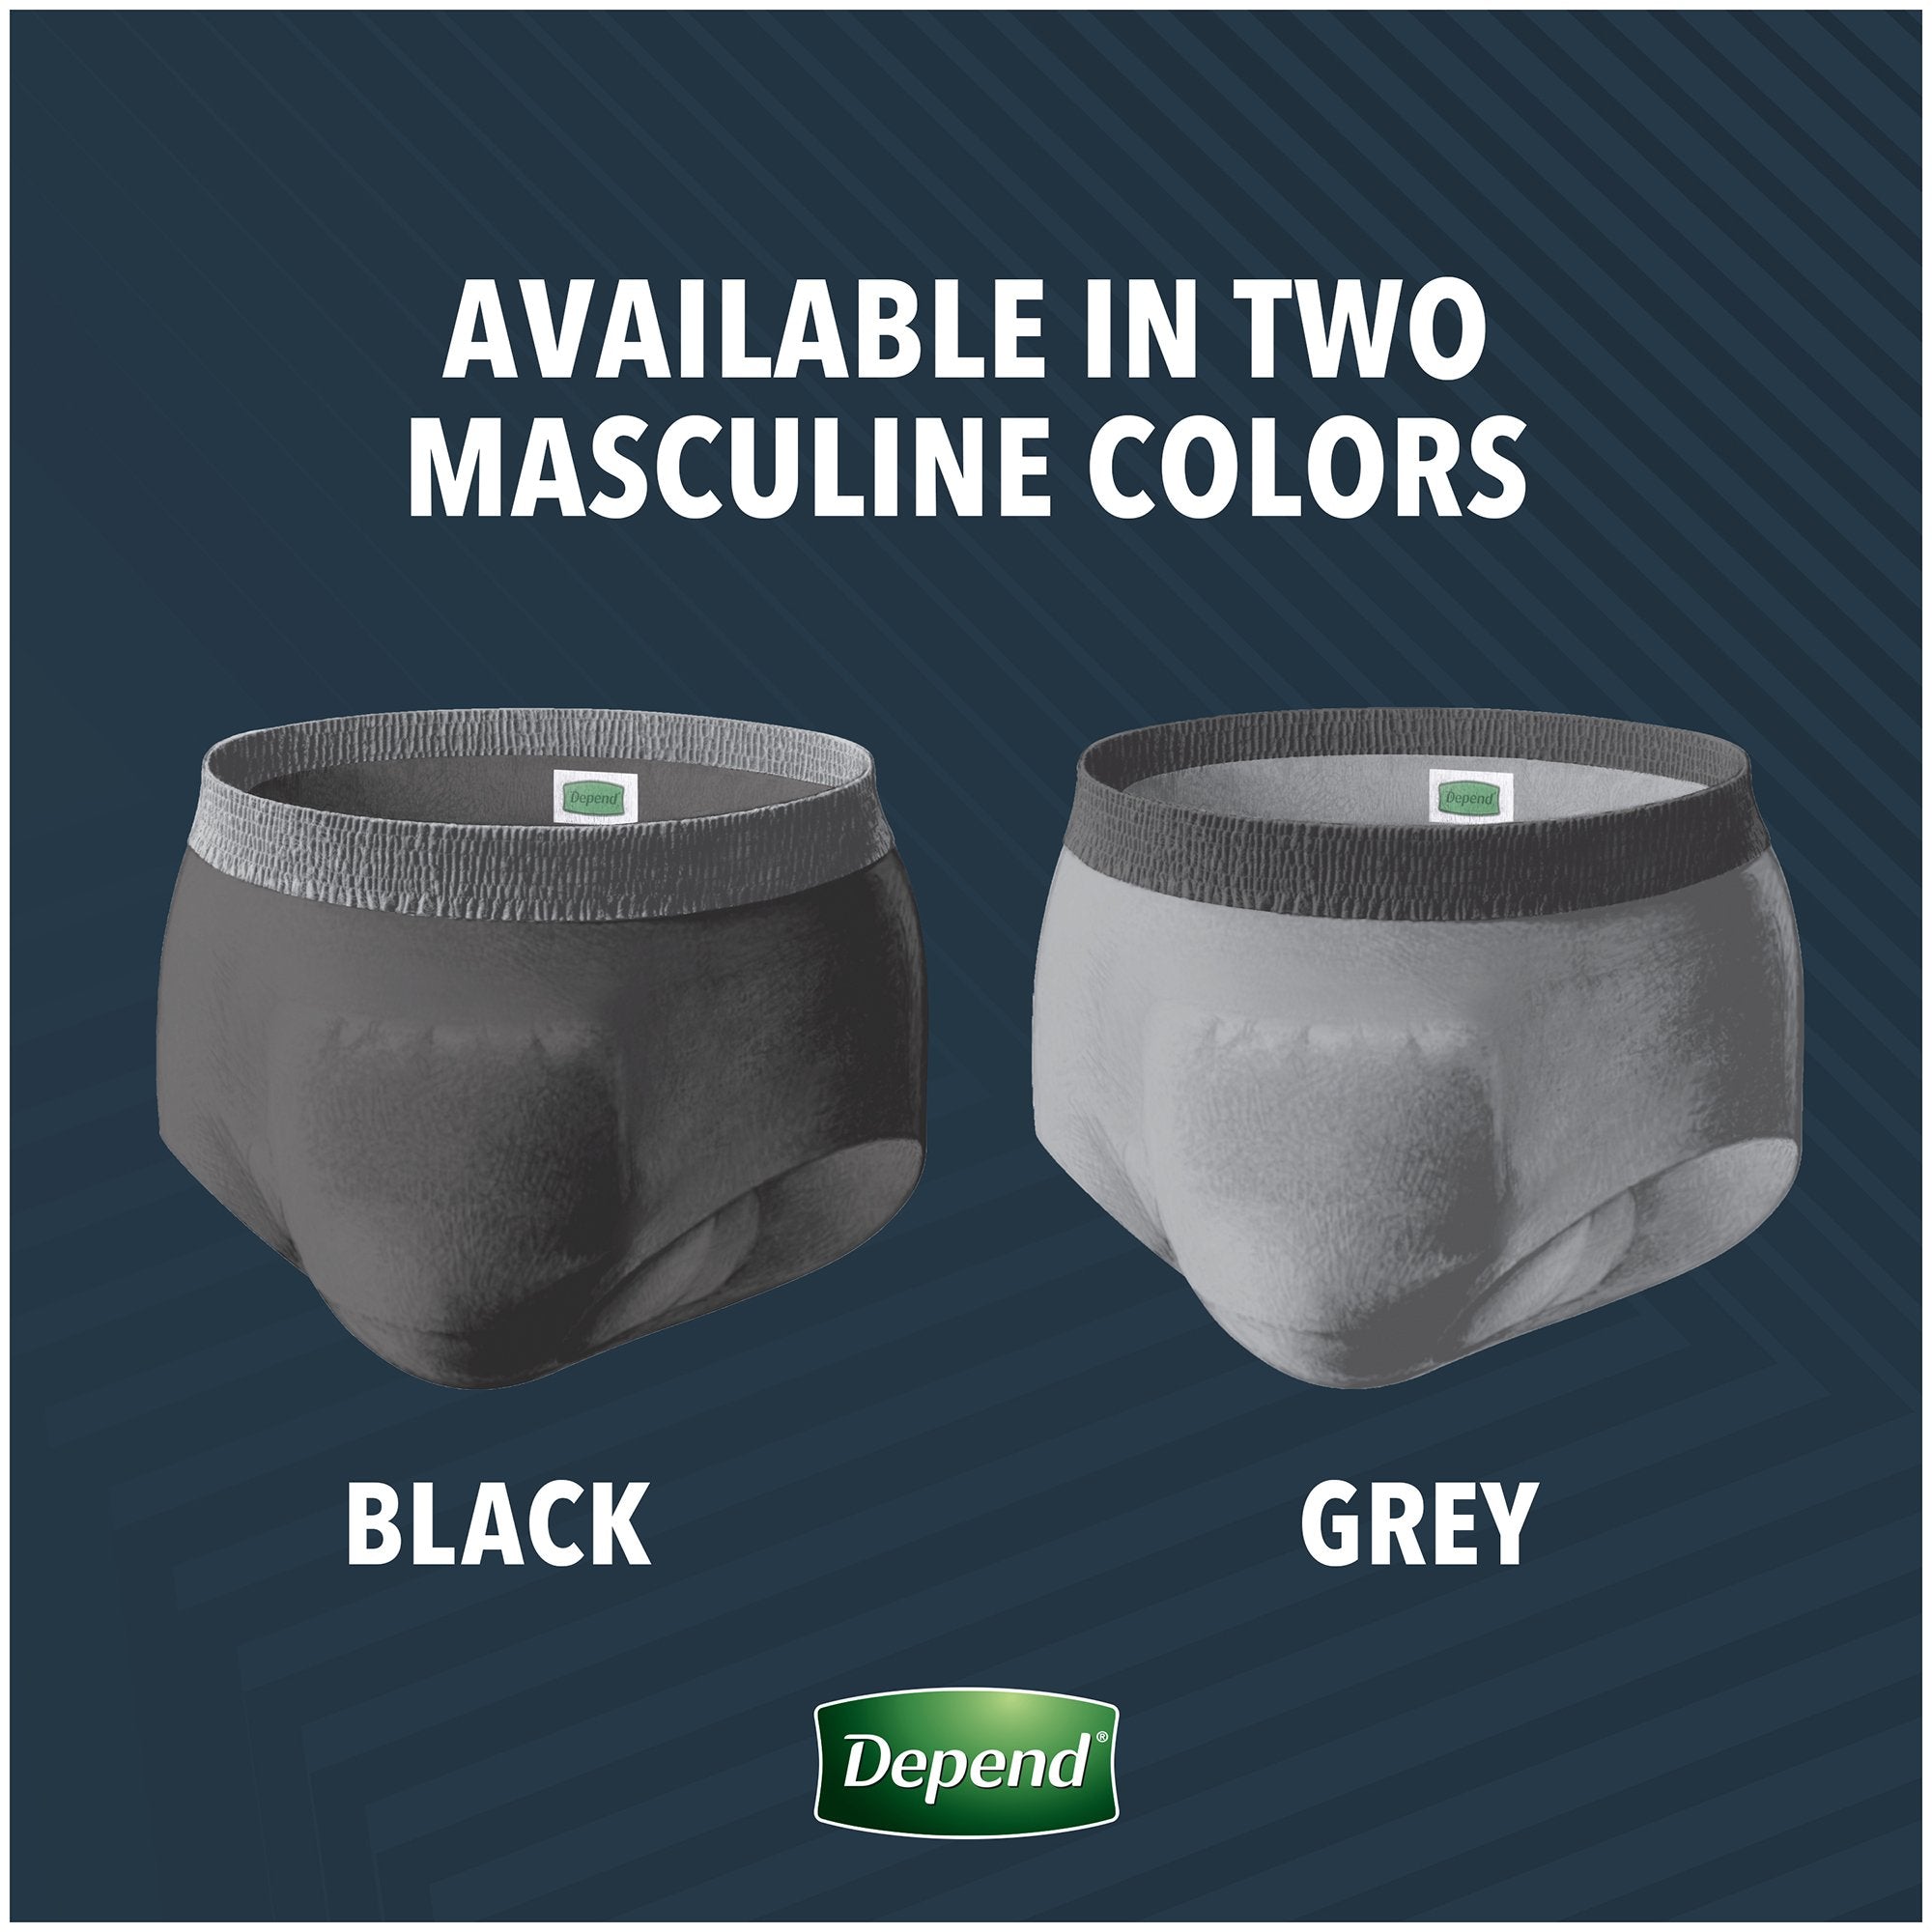 Depend® Real Fit® Maximum Absorbent Underwear, Large / Extra Large (40 Units)